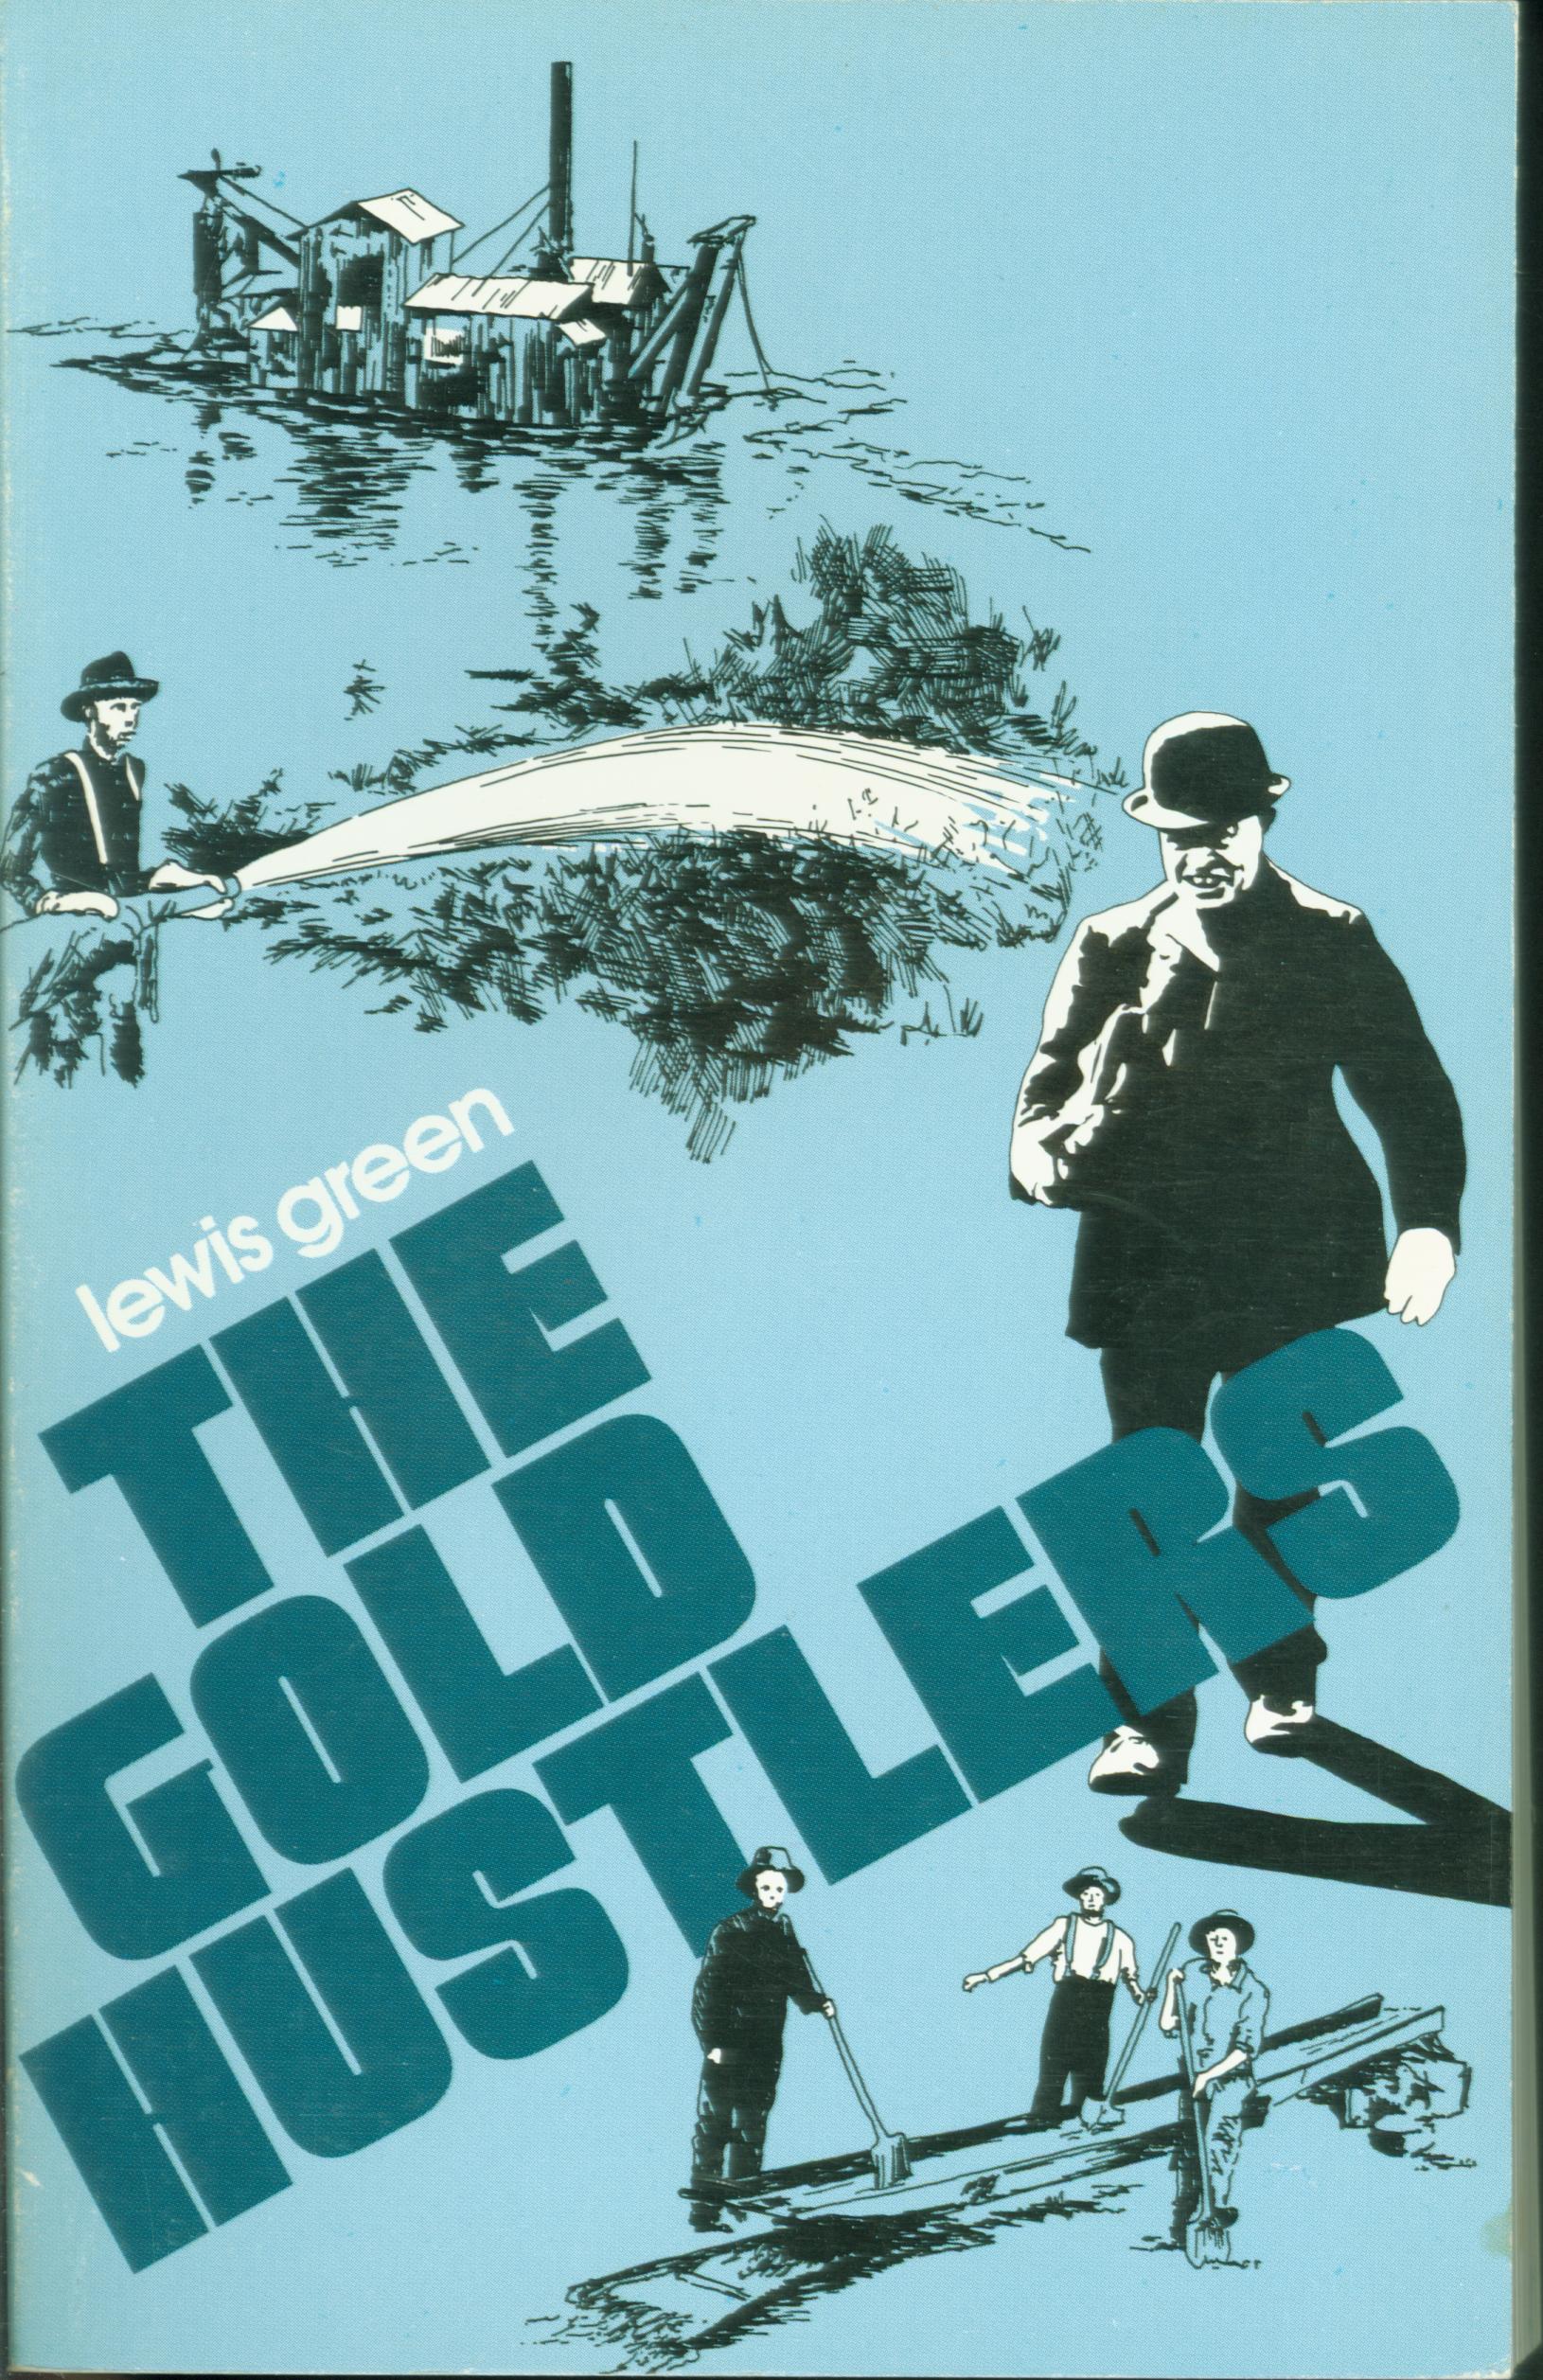 THE GOLD HUSTLERS. 